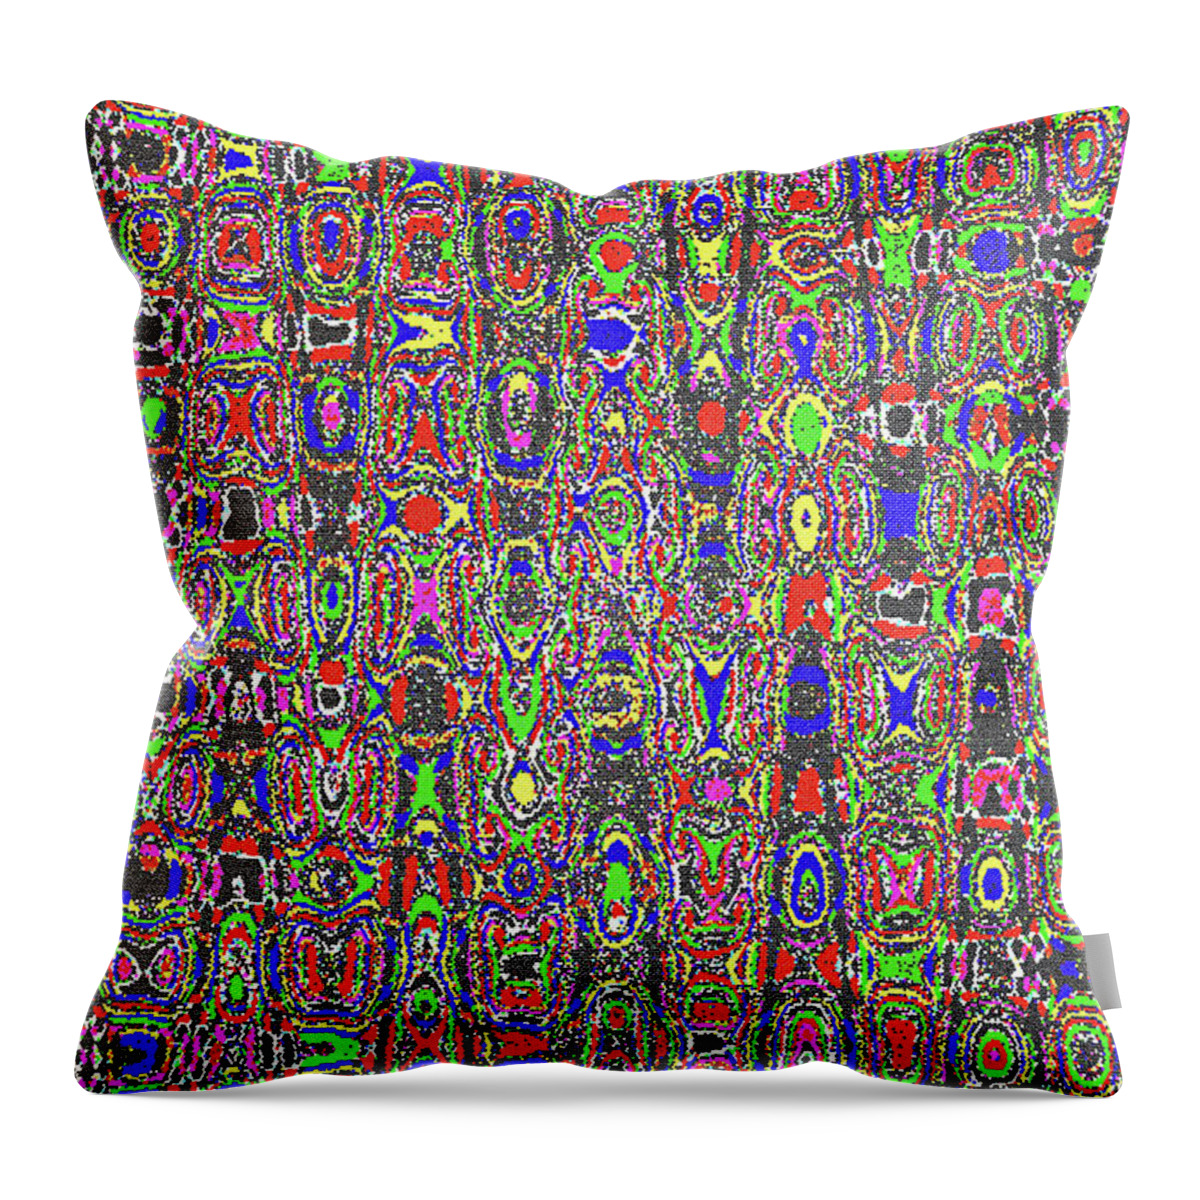 Color Play On Butternut Squash Abstract Throw Pillow featuring the digital art Stained Glass Digital by Tom Janca